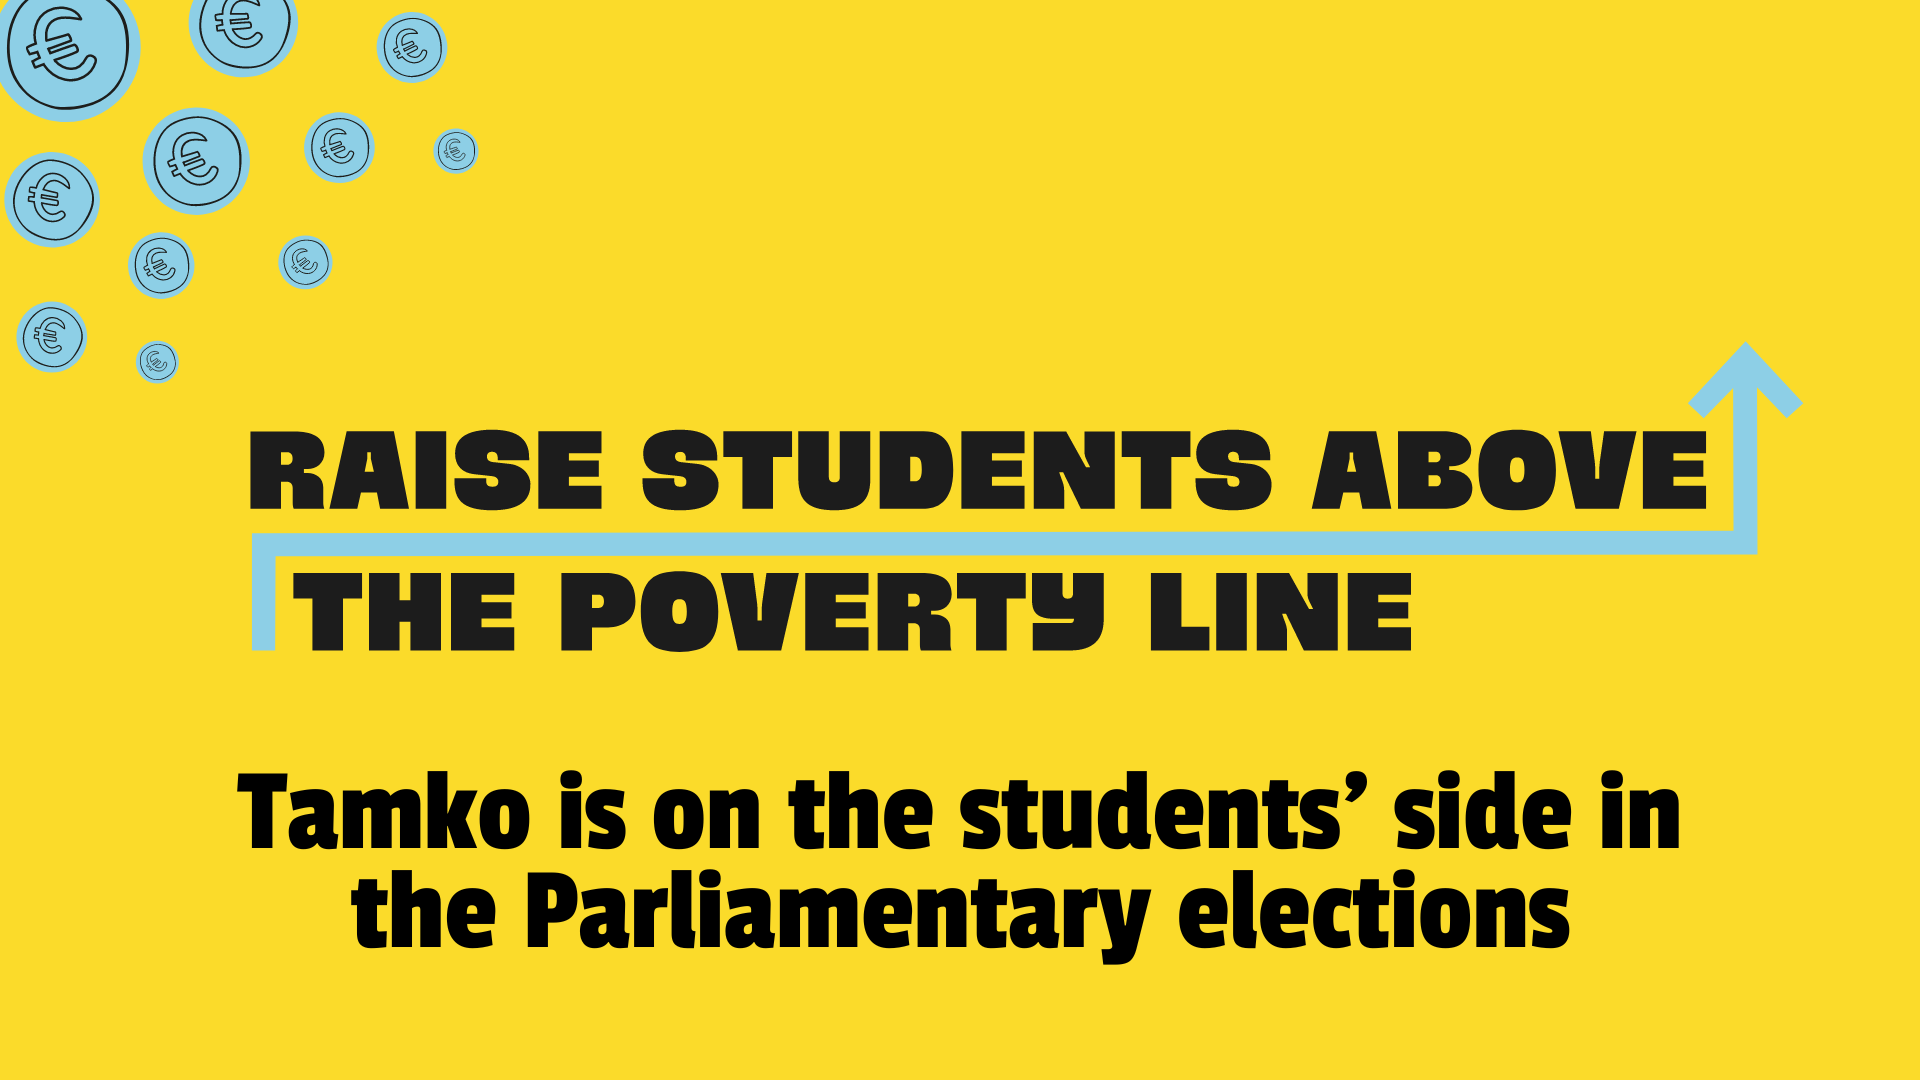 Tamko is on the students’ side in the Parliamentary elections